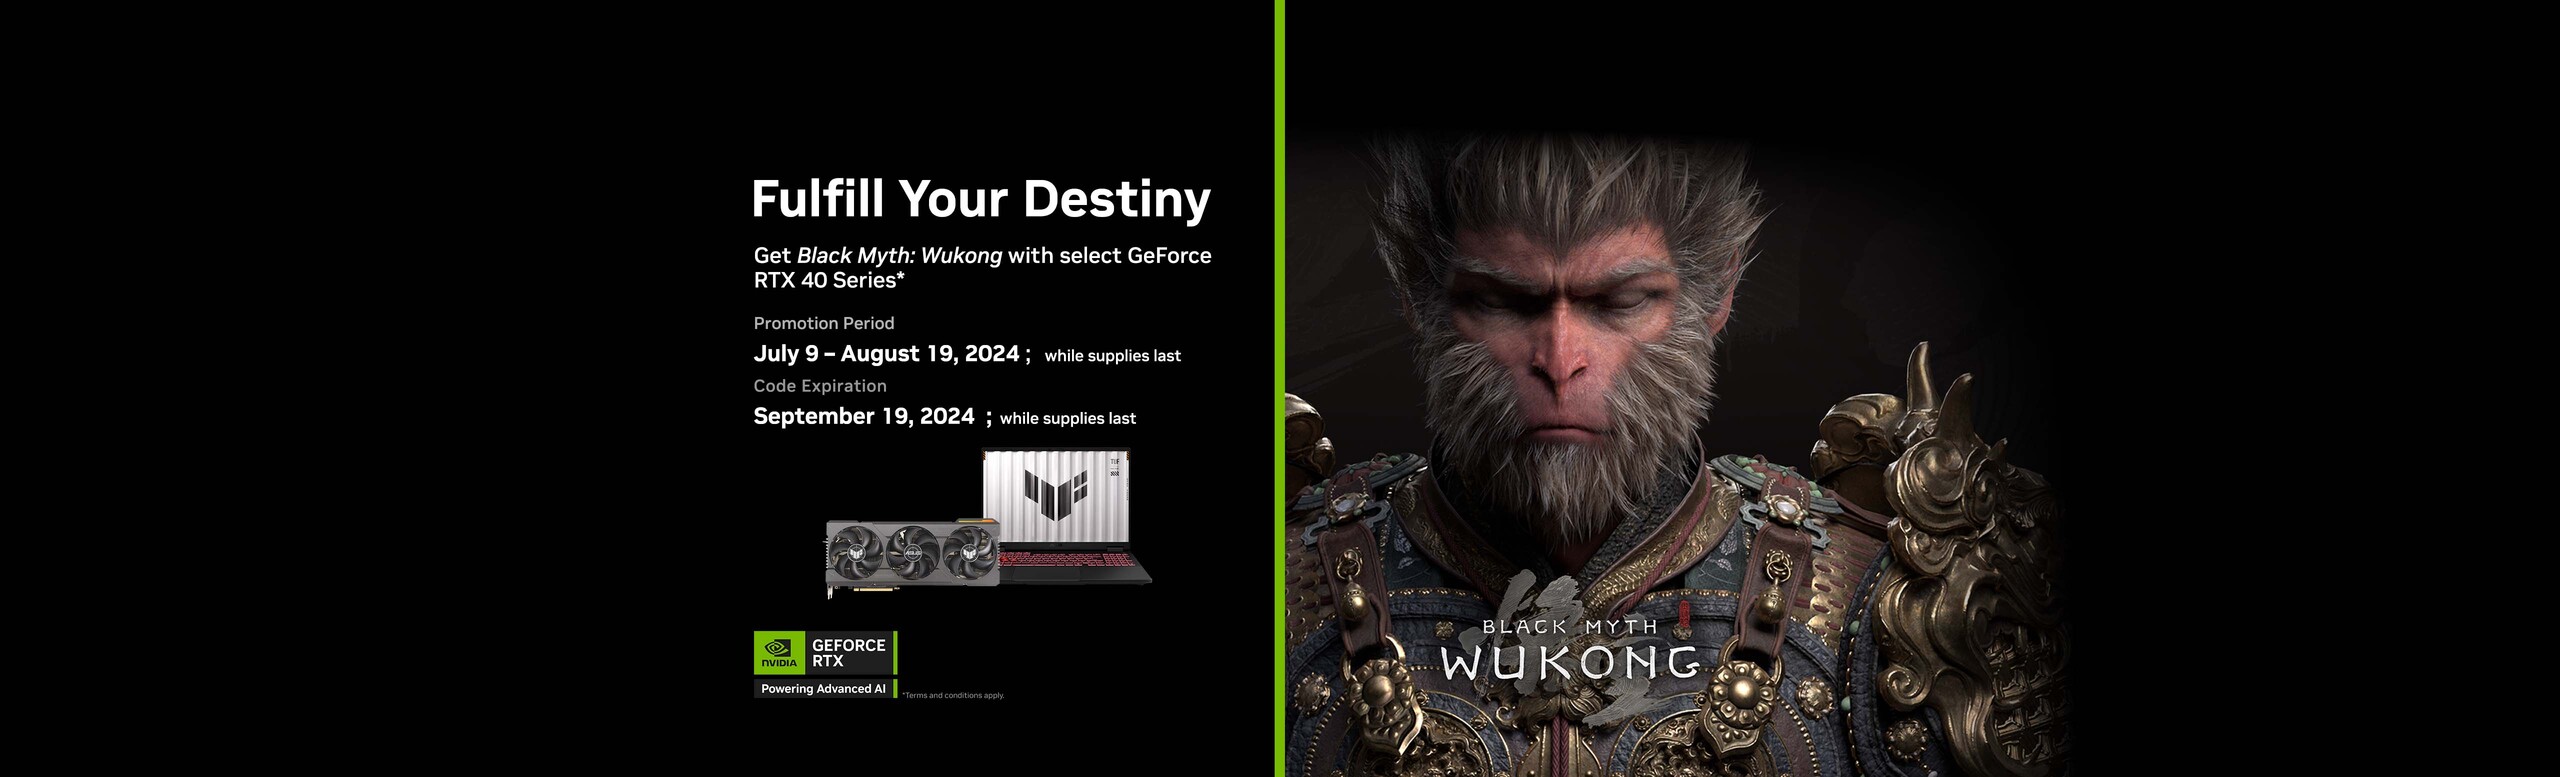 Wukong character image on the right and Fulfill your destiny slogan on the left with promotion period July 9 to August 19,2024.